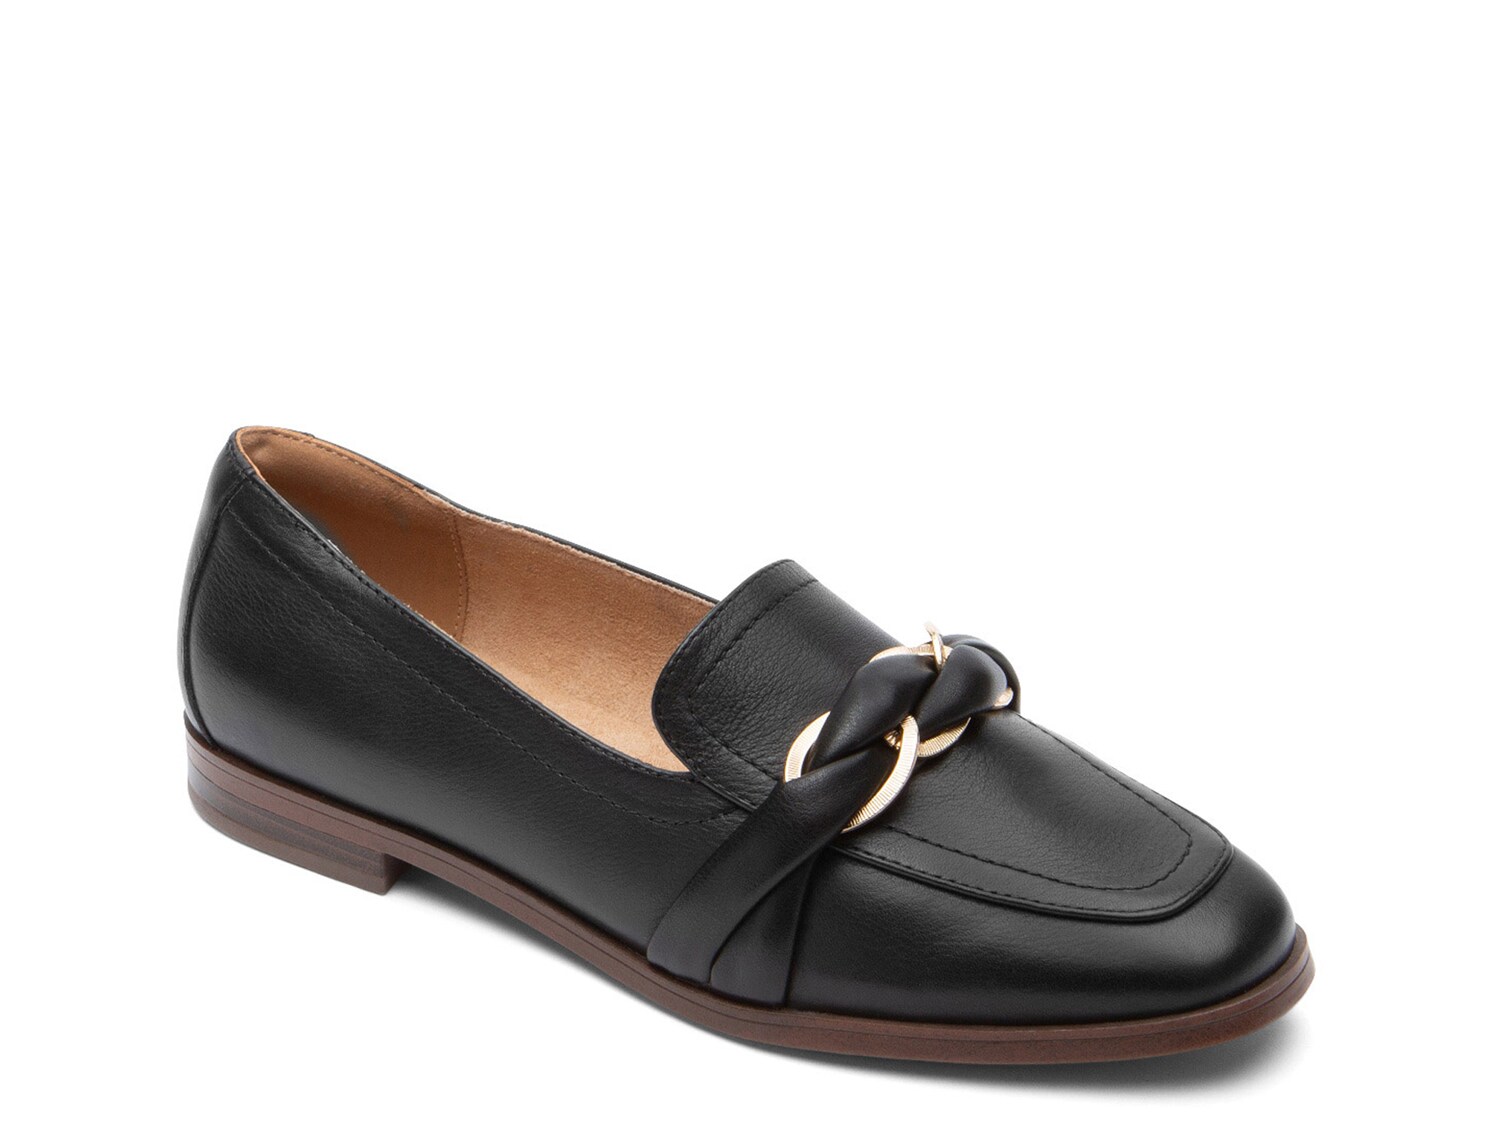 Rockport Susana Loafer - Free Shipping | DSW